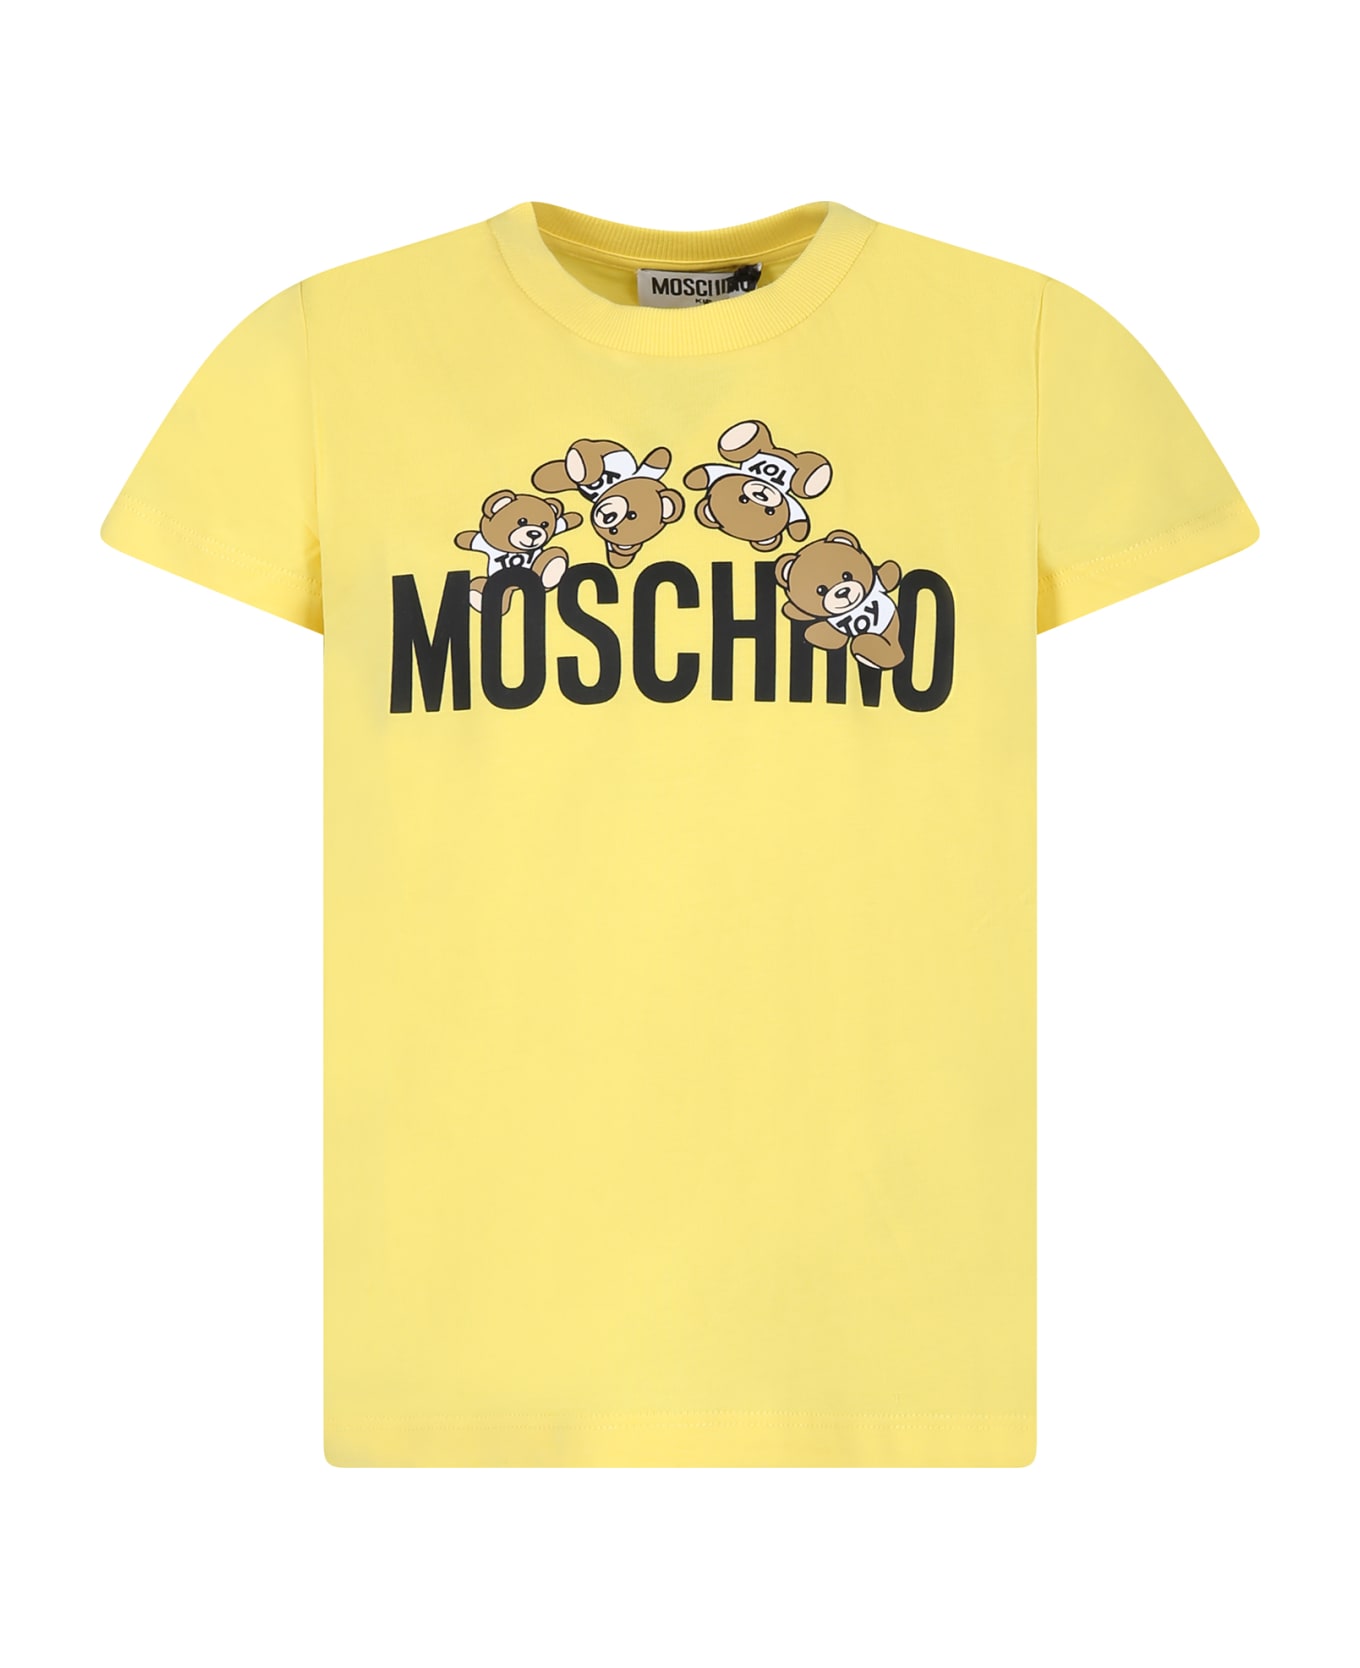 Moschino Yellow T-shirt For Kids With Teddy Bears And Logo - Yellow